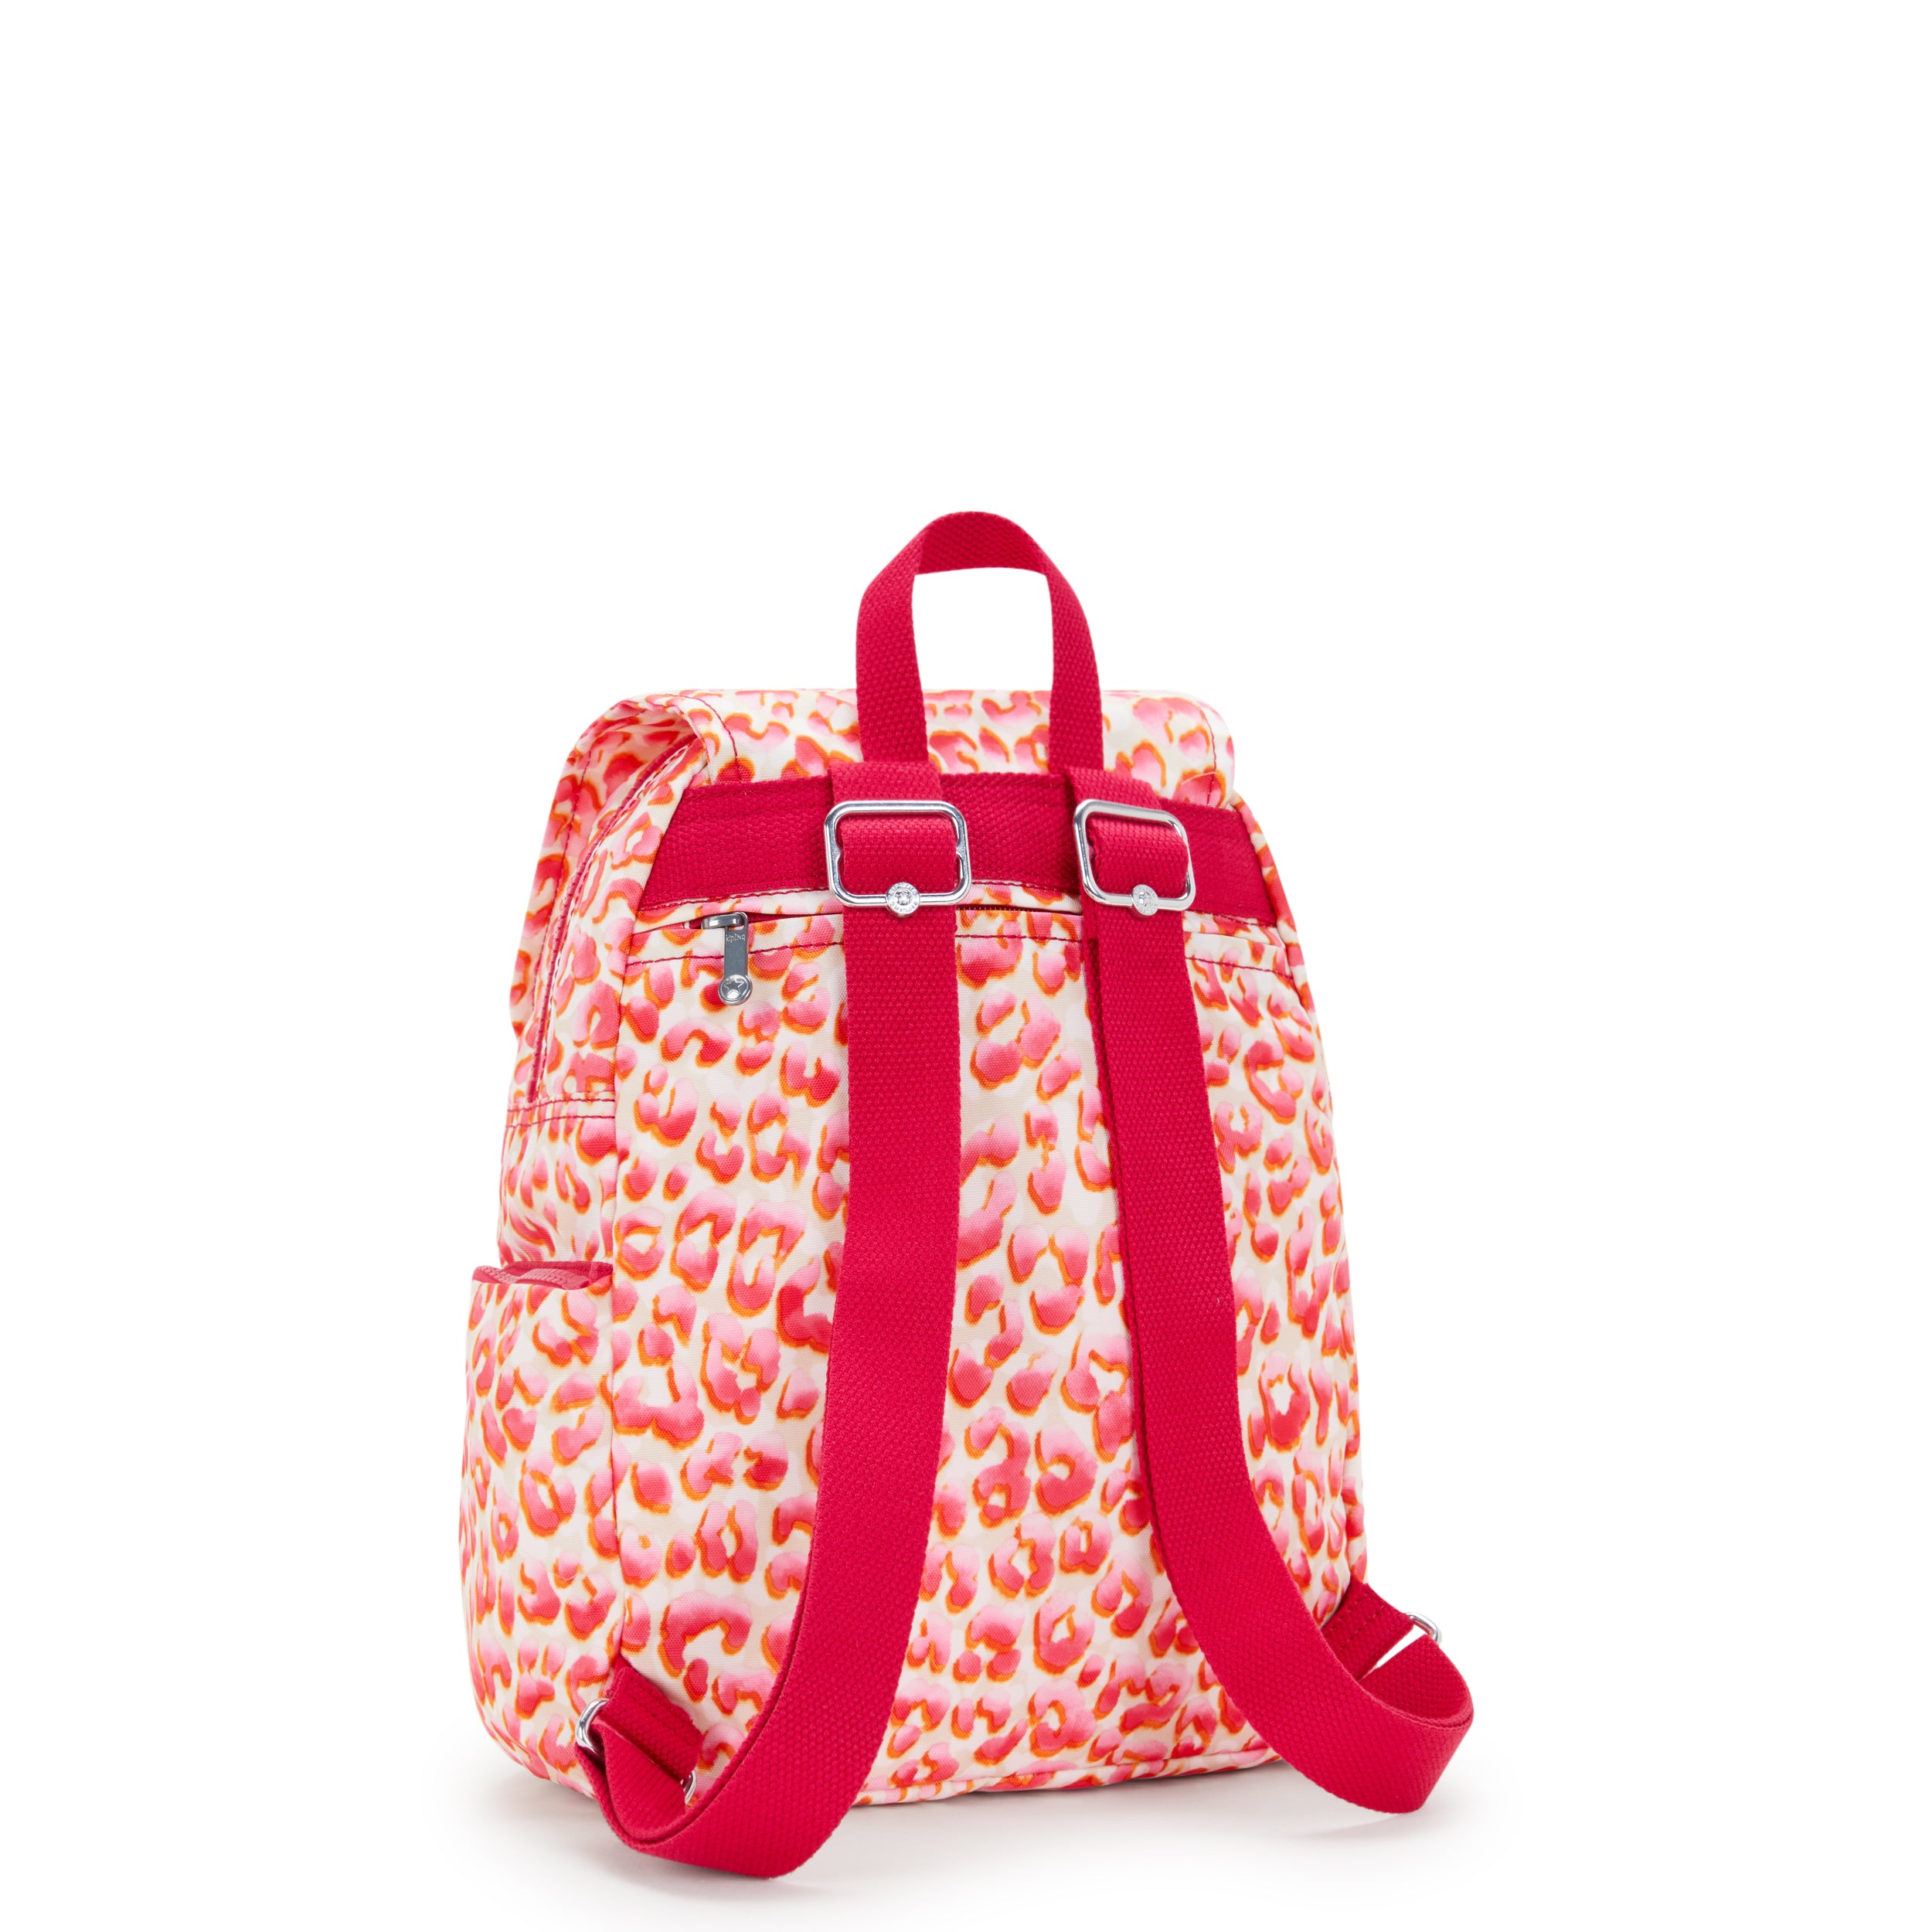 KIPLING-City Zip S-Small Backpack with Adjustable Straps-Latin Cheetah-I6345-6LX